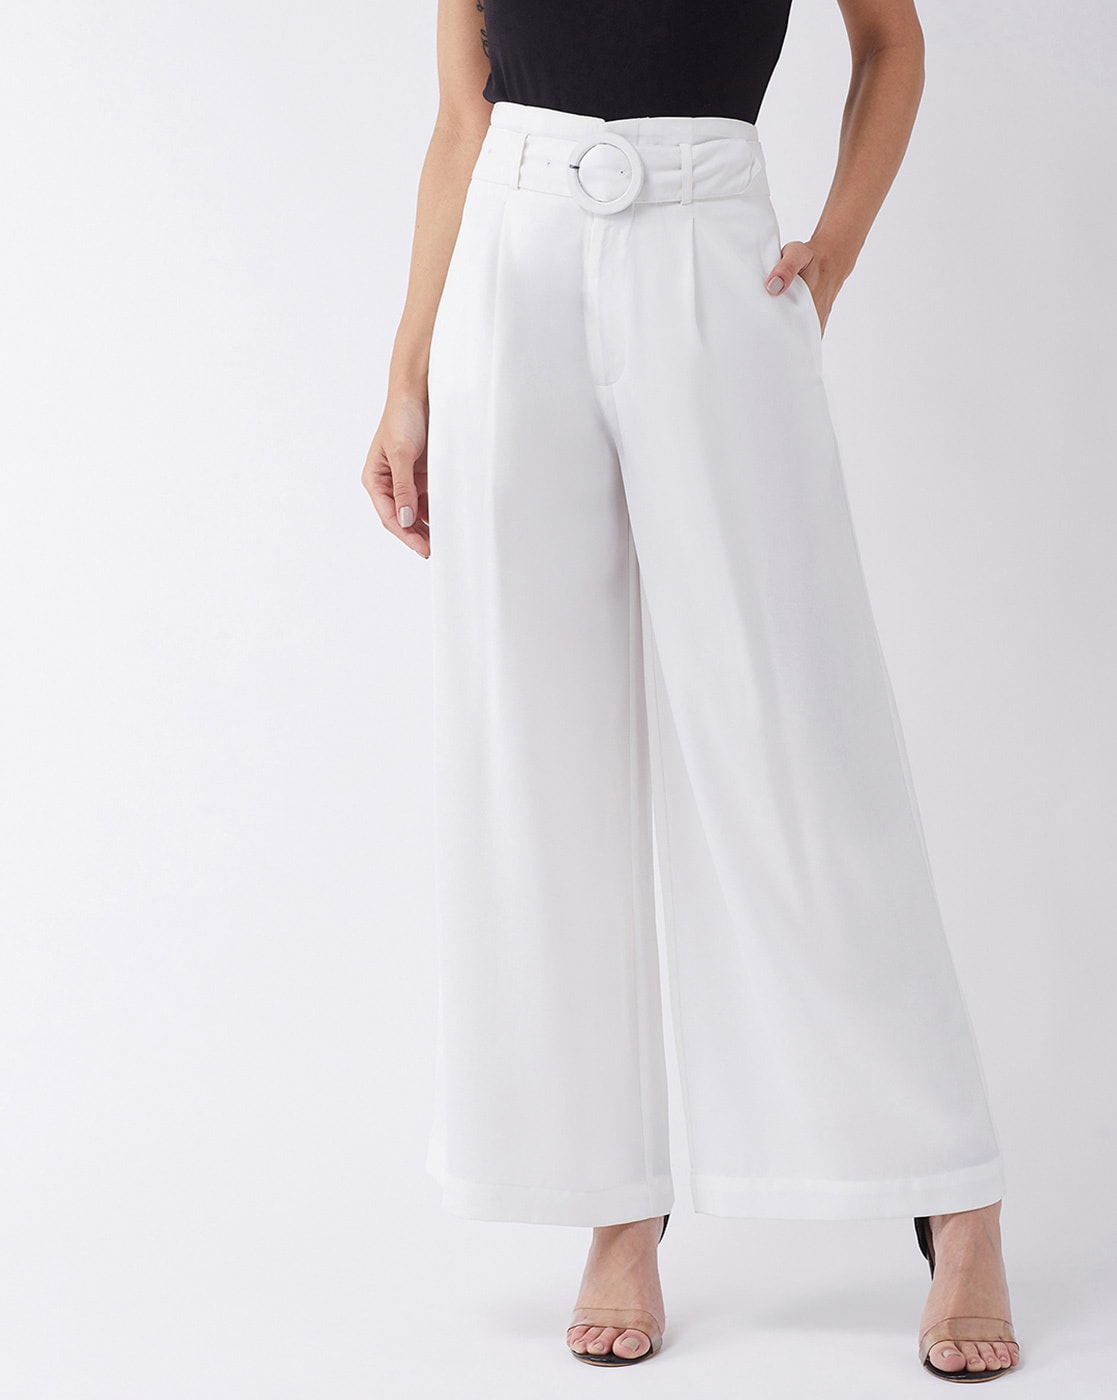 Enjoy more than 125 white high waisted trousers super hot